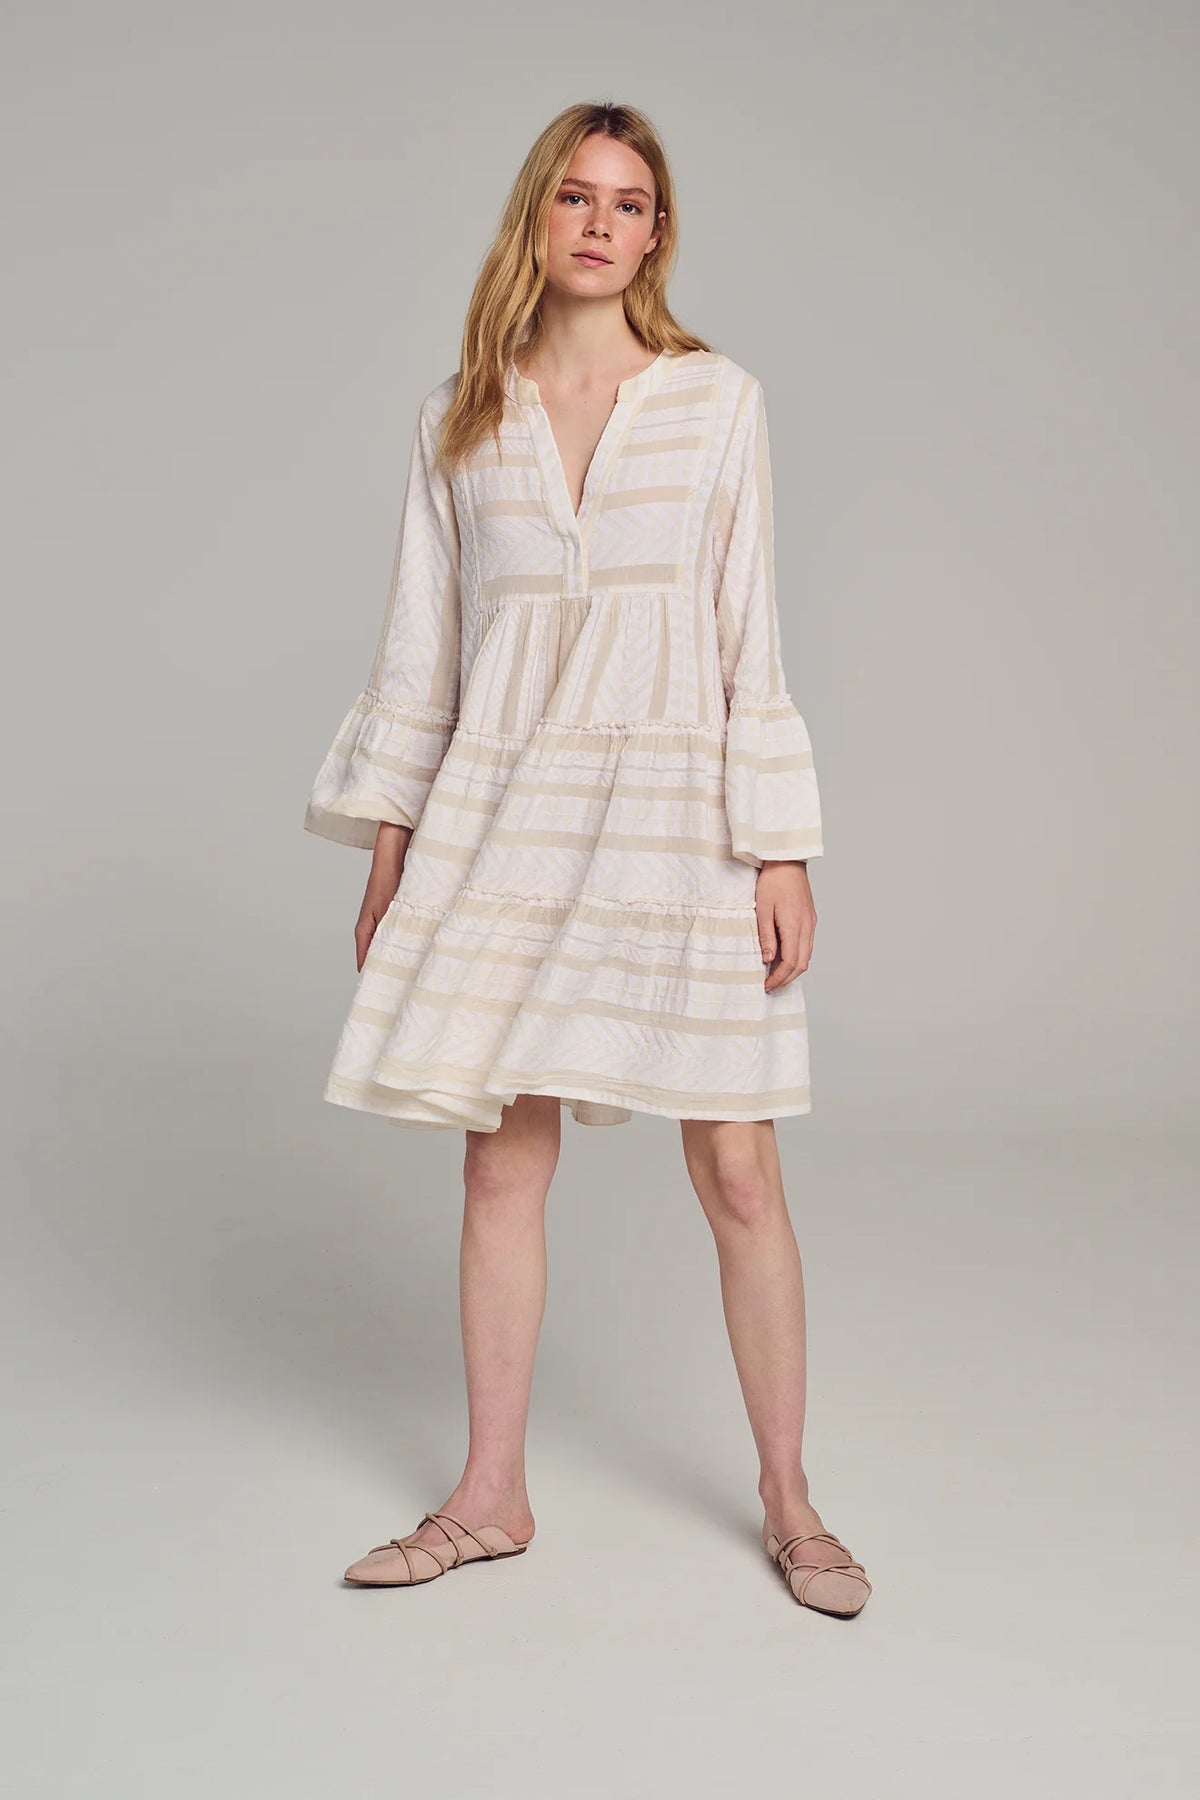 Ecru and off white beach dress knee length with tiered skirt notch neck and flared long sleeves